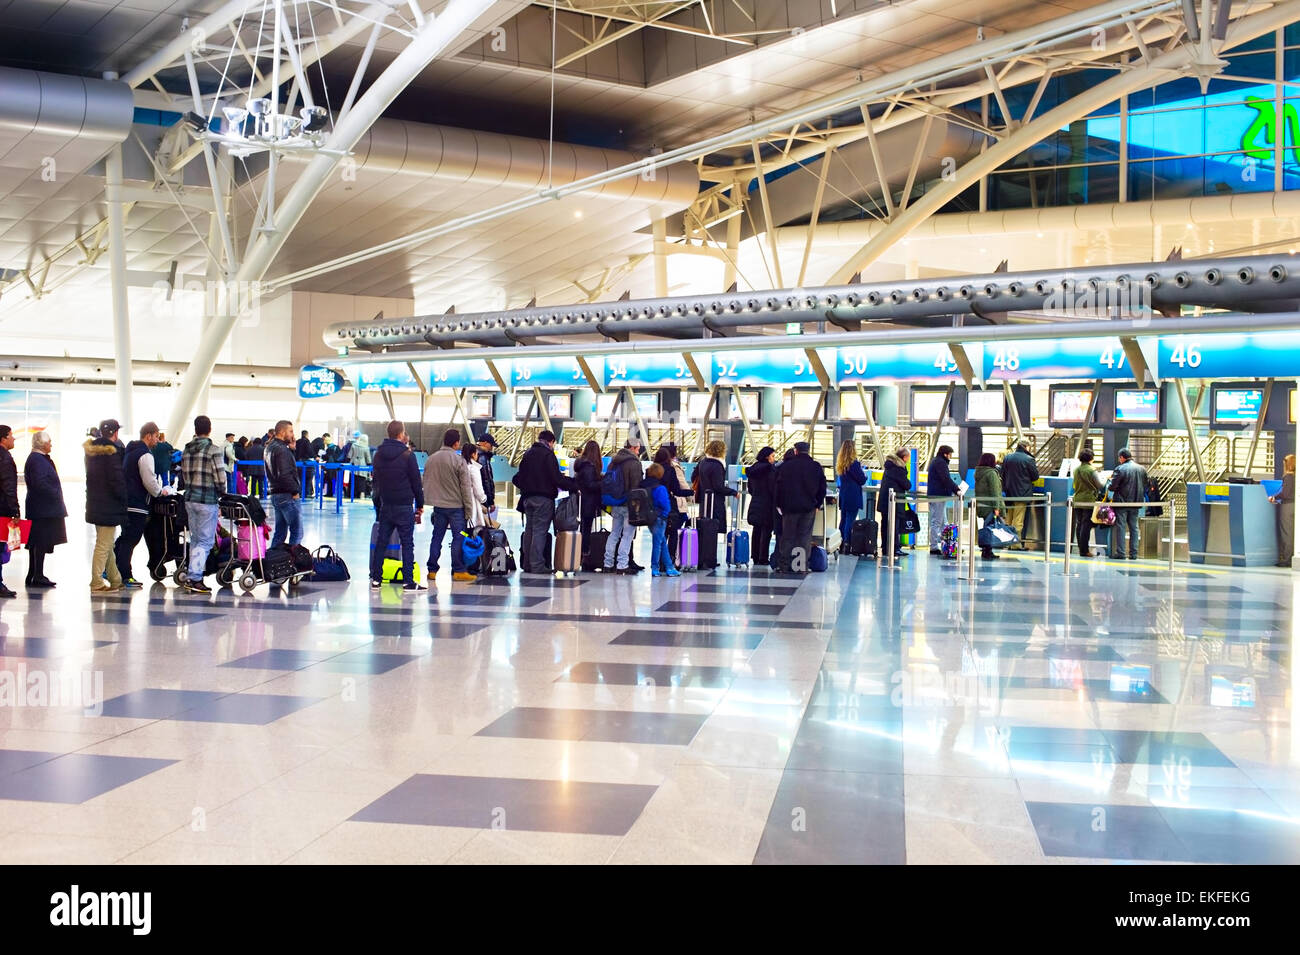 People waiting in queue at a check-in counter in Francisco Sa Carneiro Airport. The airport was Stock Photo